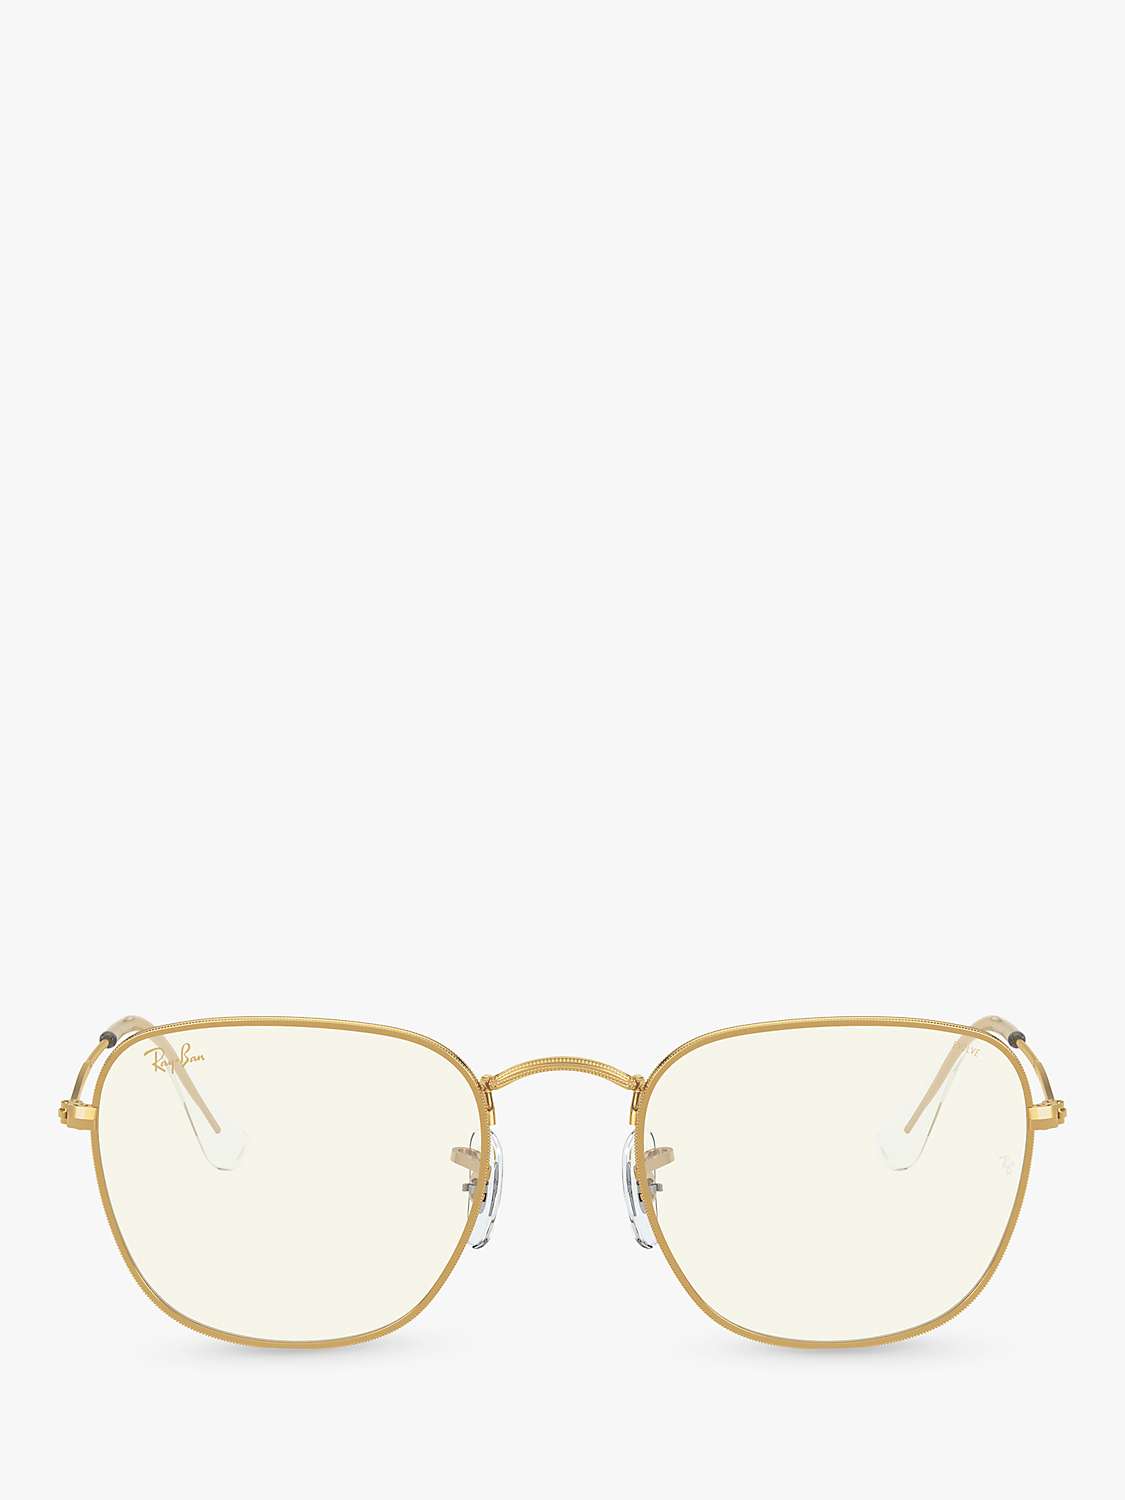 Buy Ray-Ban RB3857 Women's Square Sunglasses, Gold Online at johnlewis.com